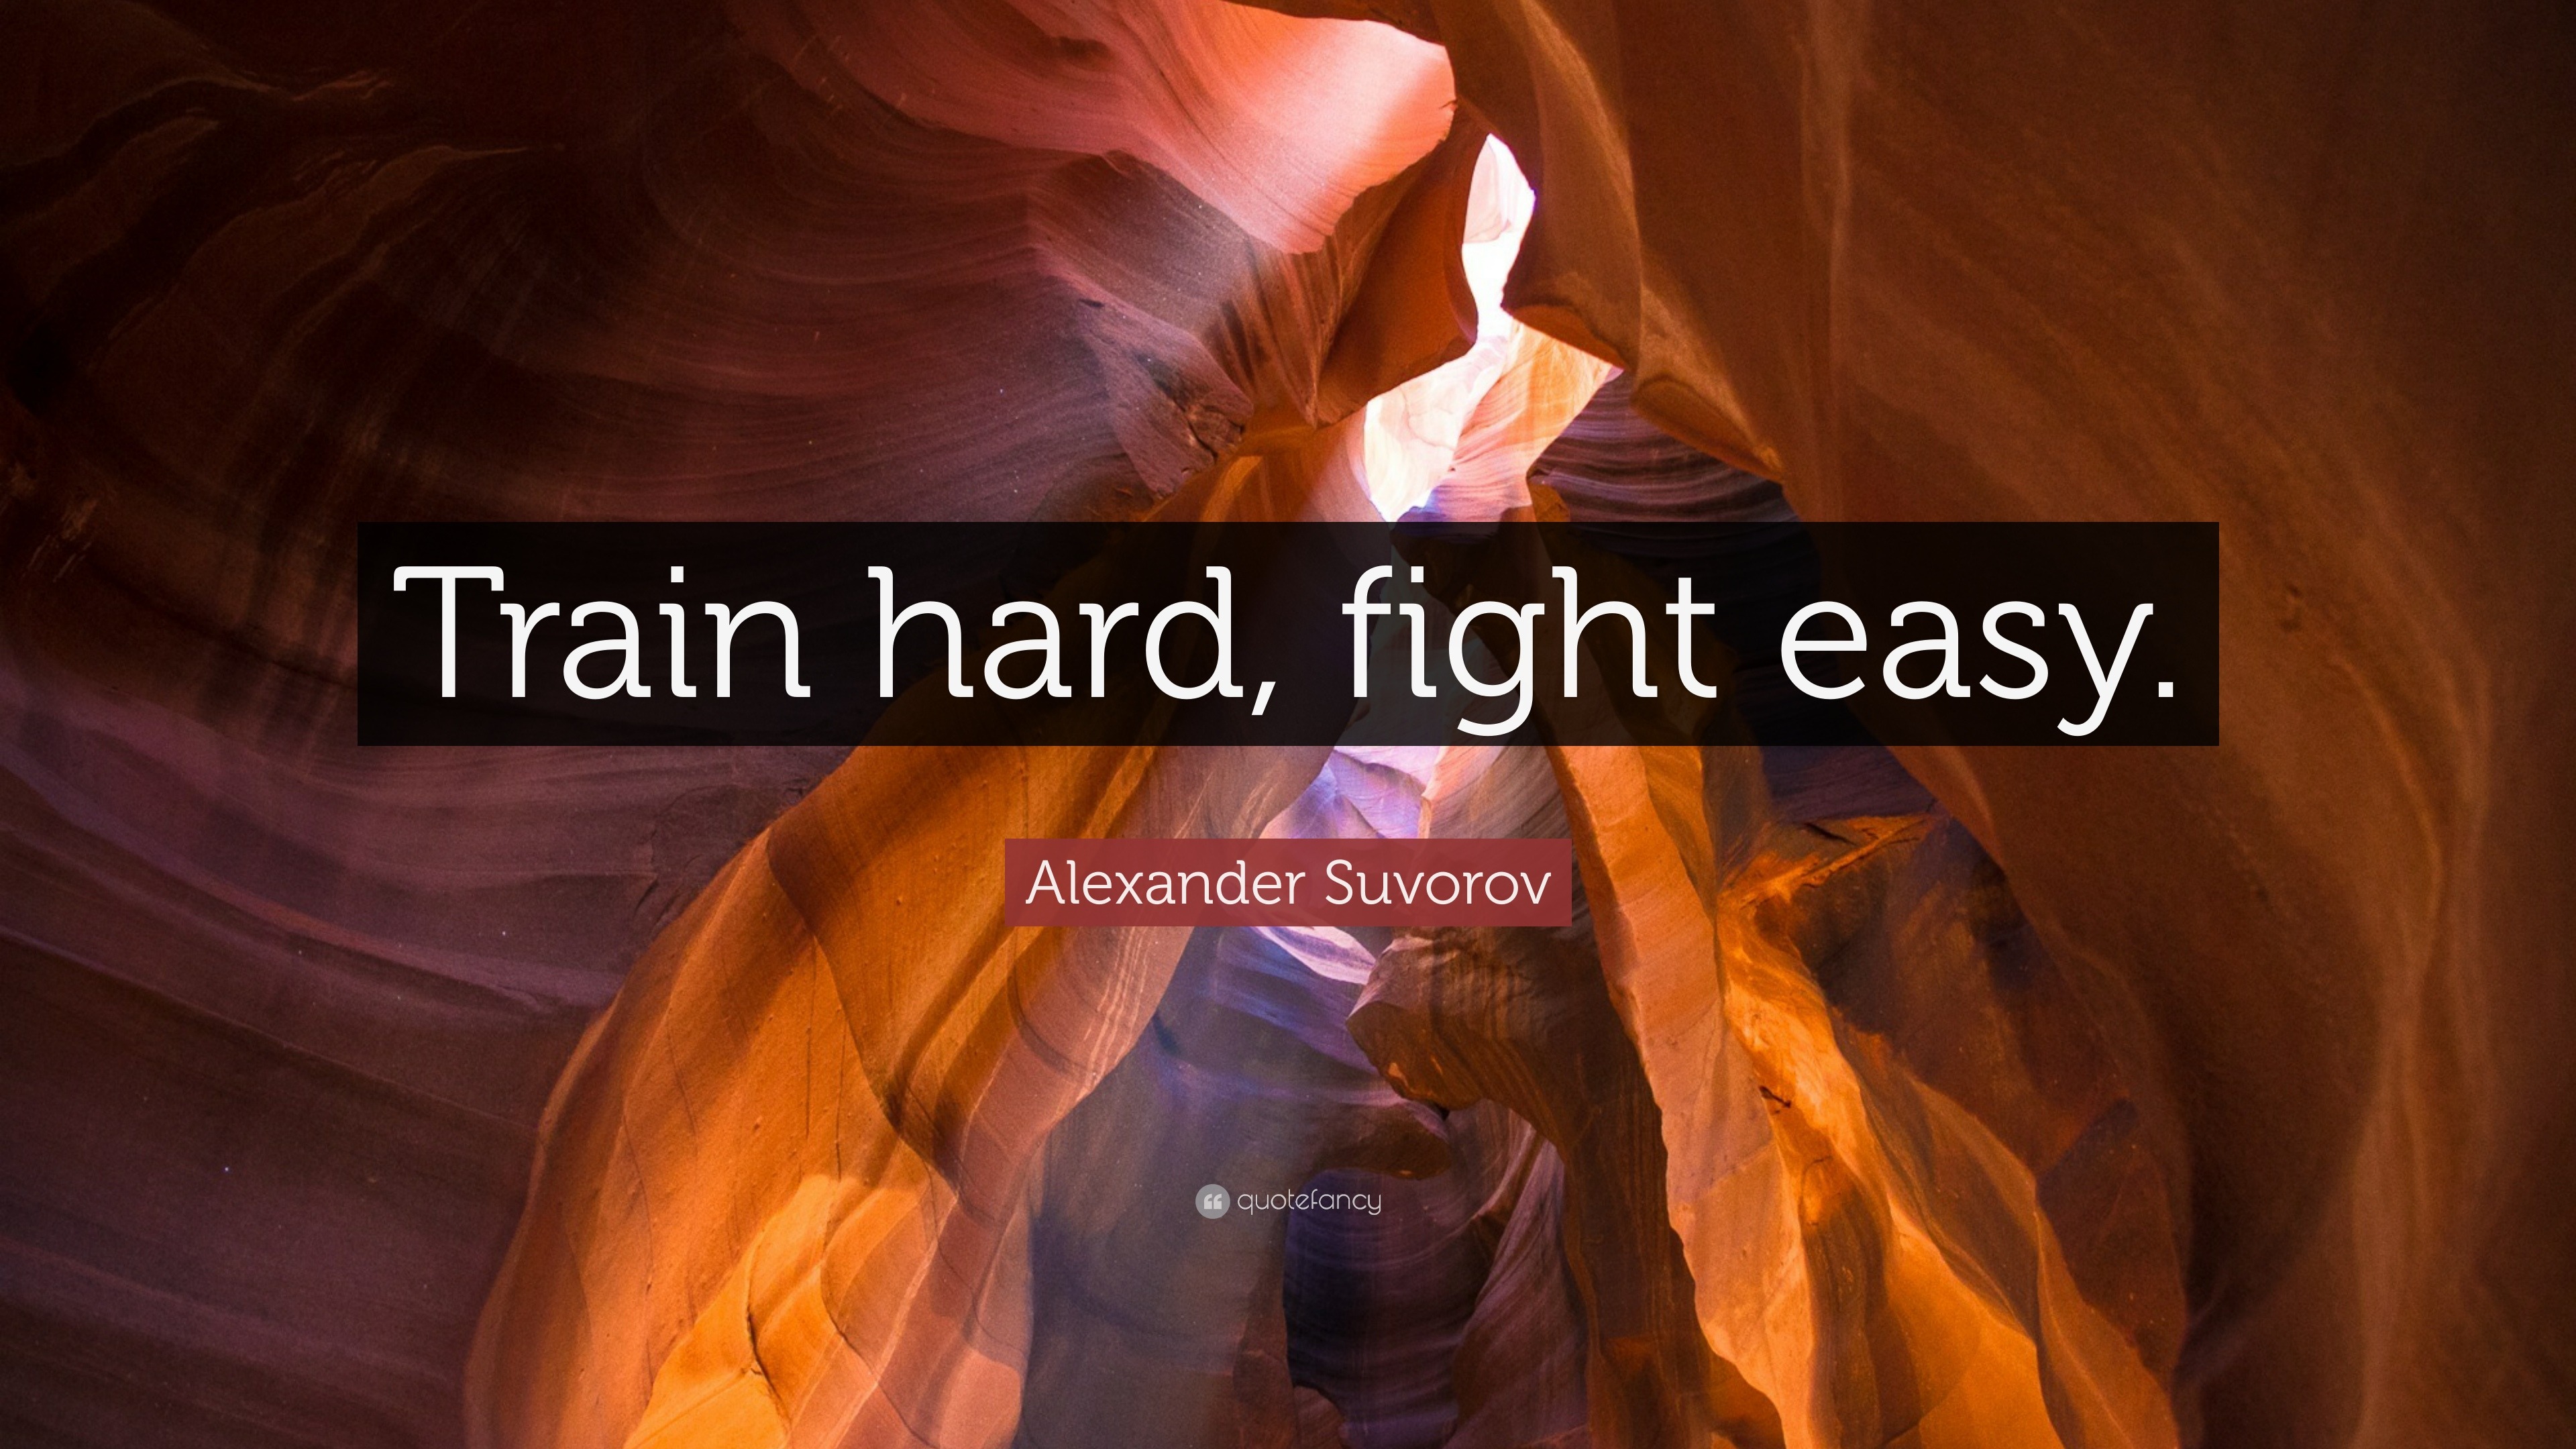 Alexander Suvorov Quote “train Hard Fight Easy”